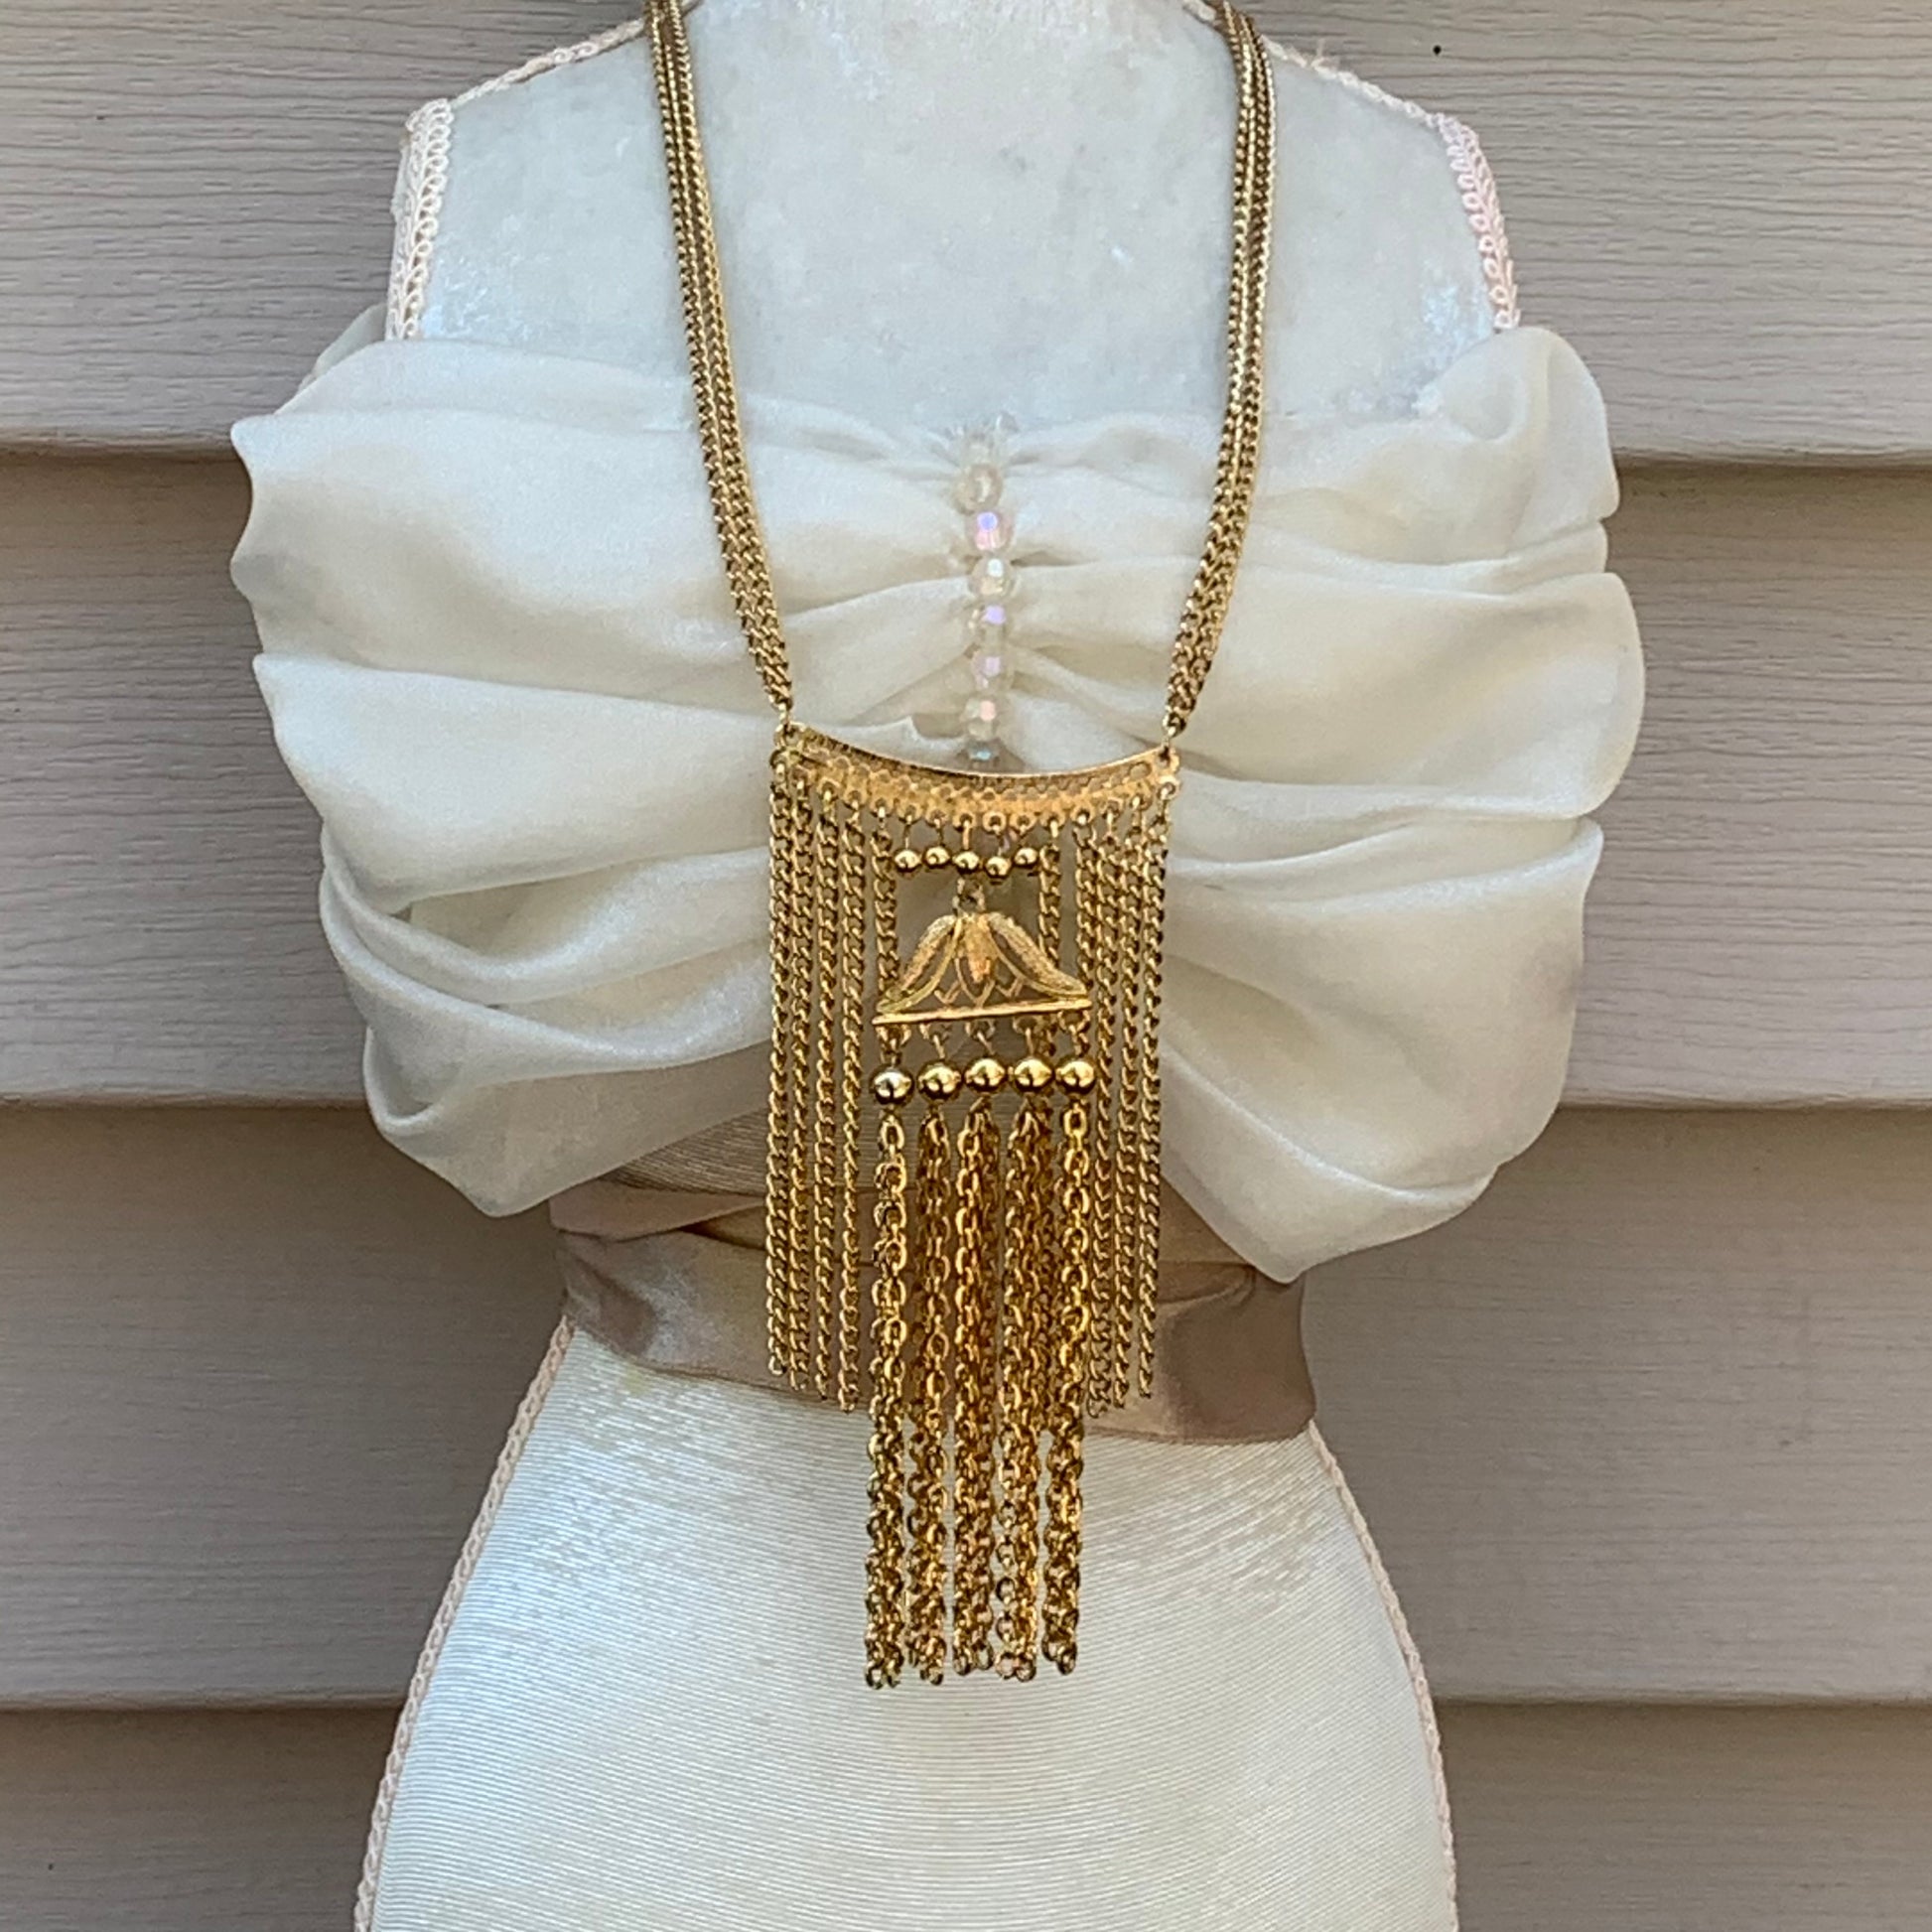 Layers of vintage chain with a pagoda pendant in the center. 